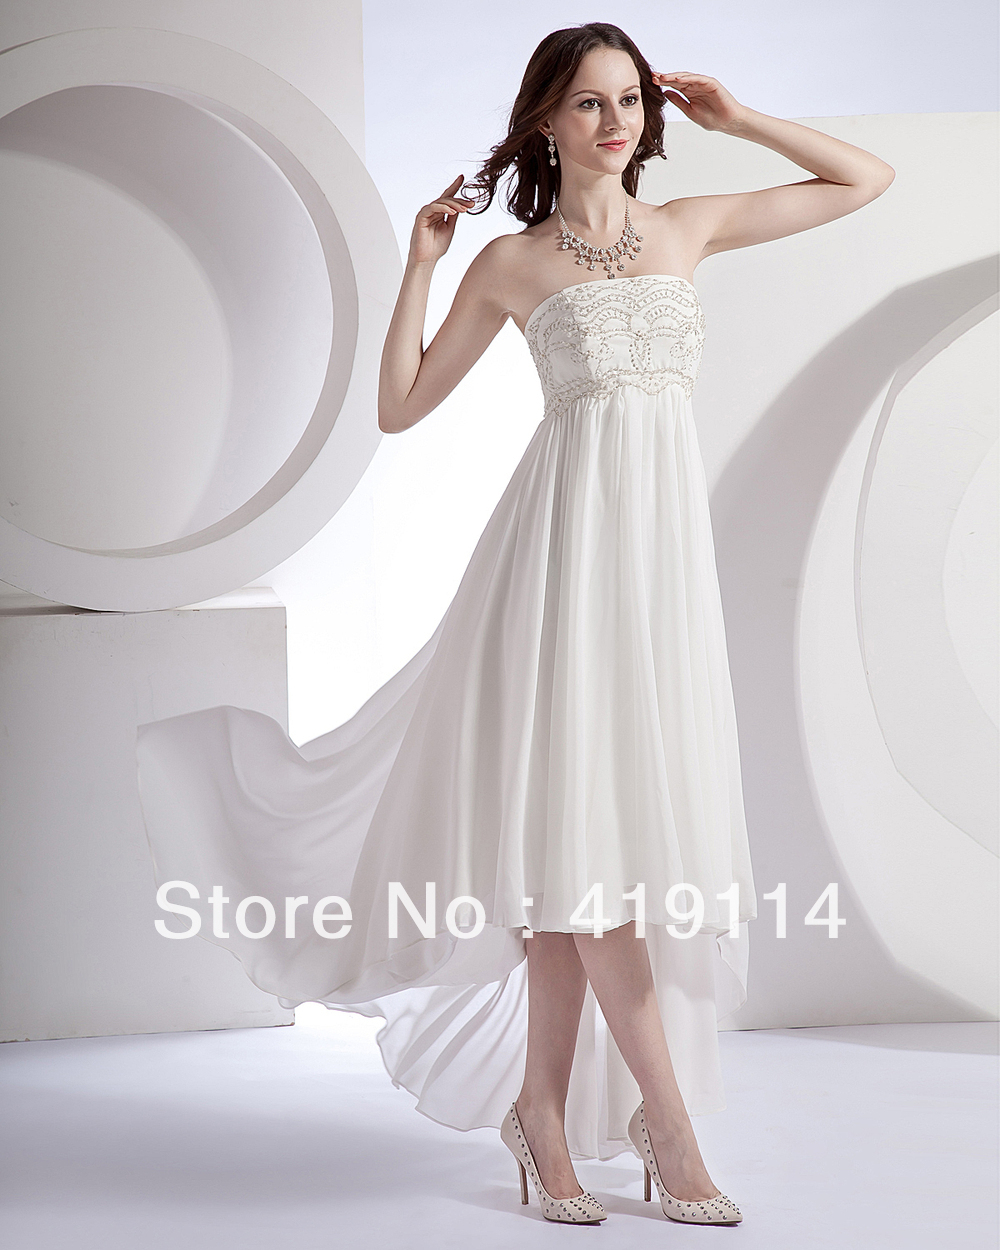 Factory Outlet Custom-made 2013 Best-selling style Cocktail Party Birthday dress Bride all size&Color Optional (FR8A87QD)